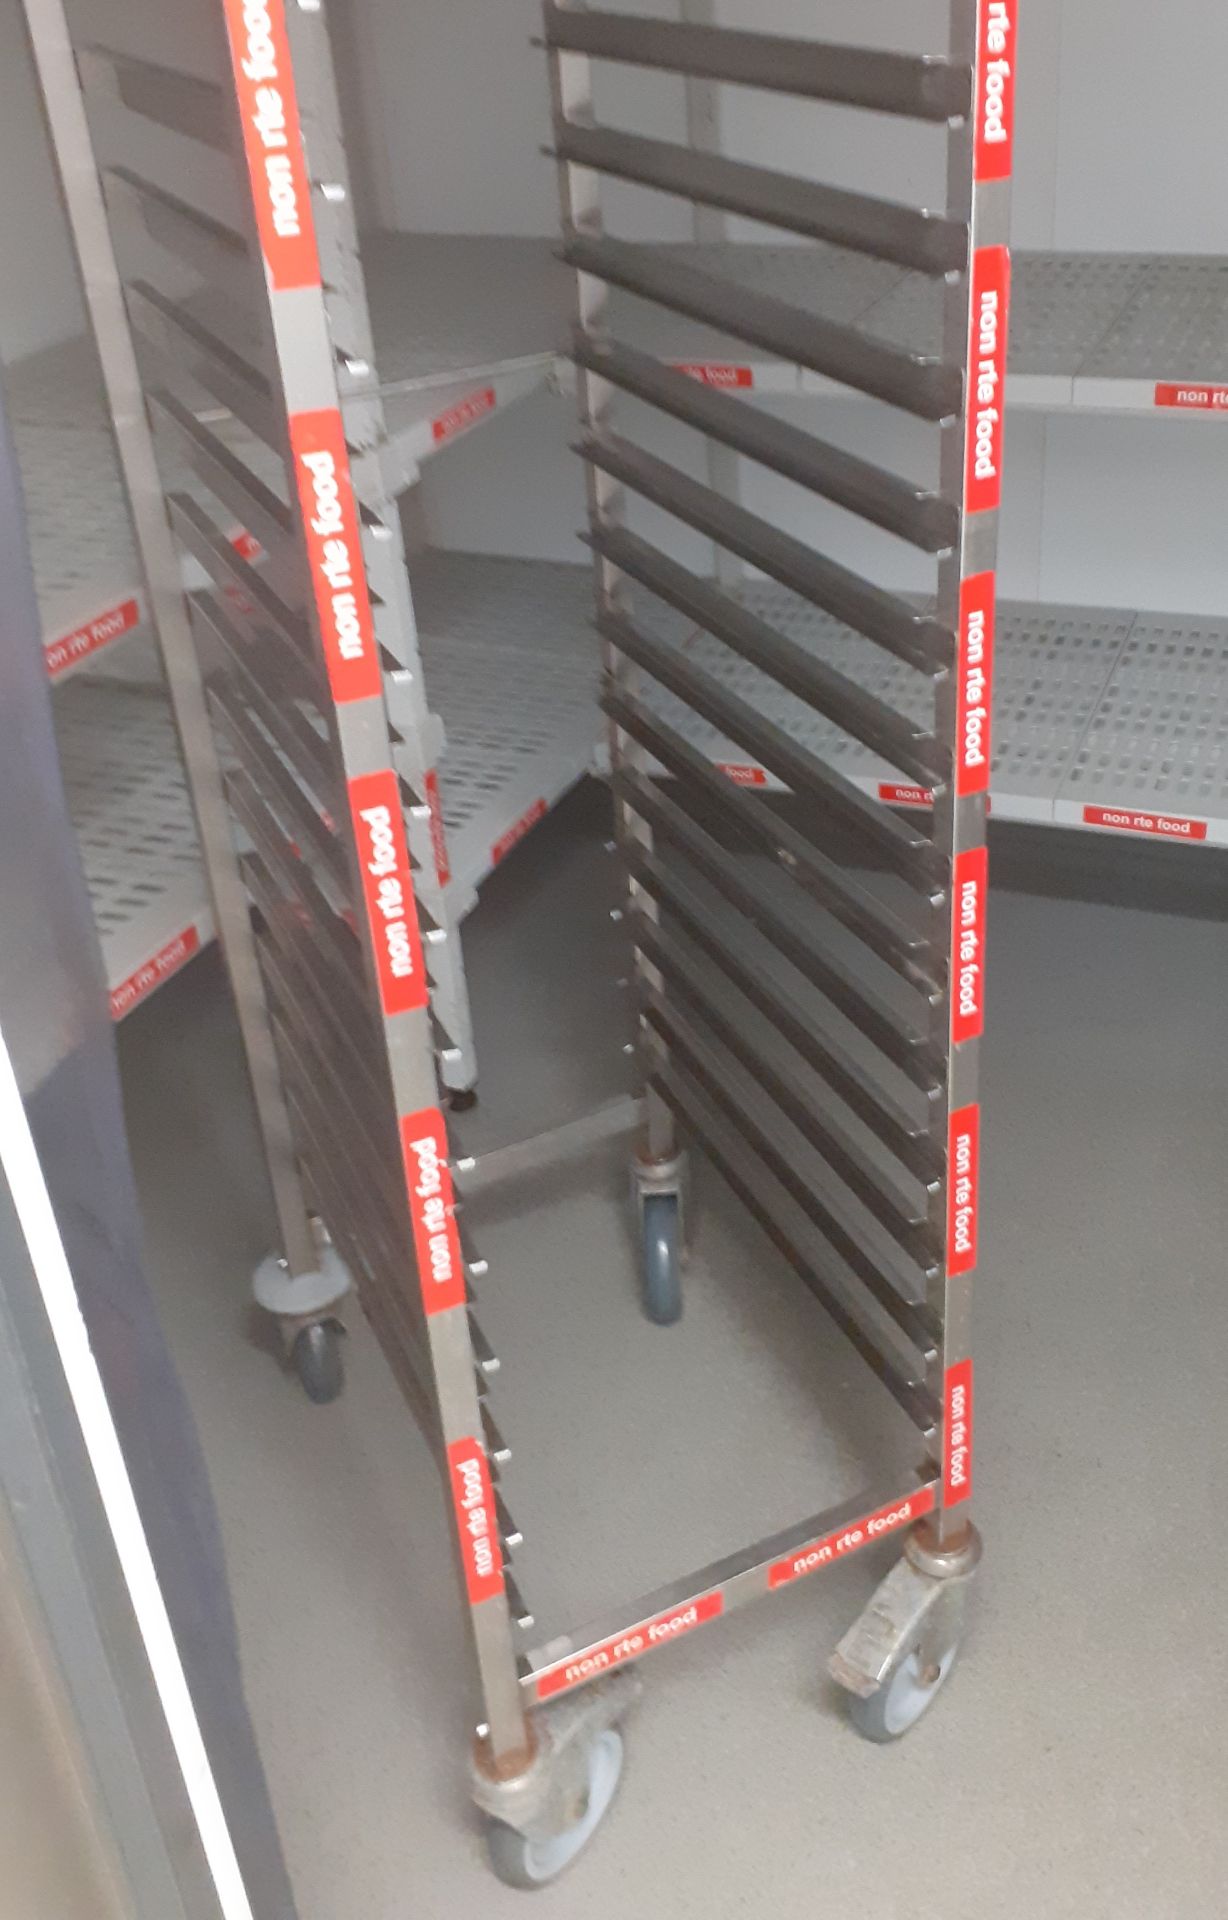 1 x Stainless Steel 20 Tier Commercial Kitchen Food Tray Rack - CL582 - Location: London EC4V - Image 4 of 4